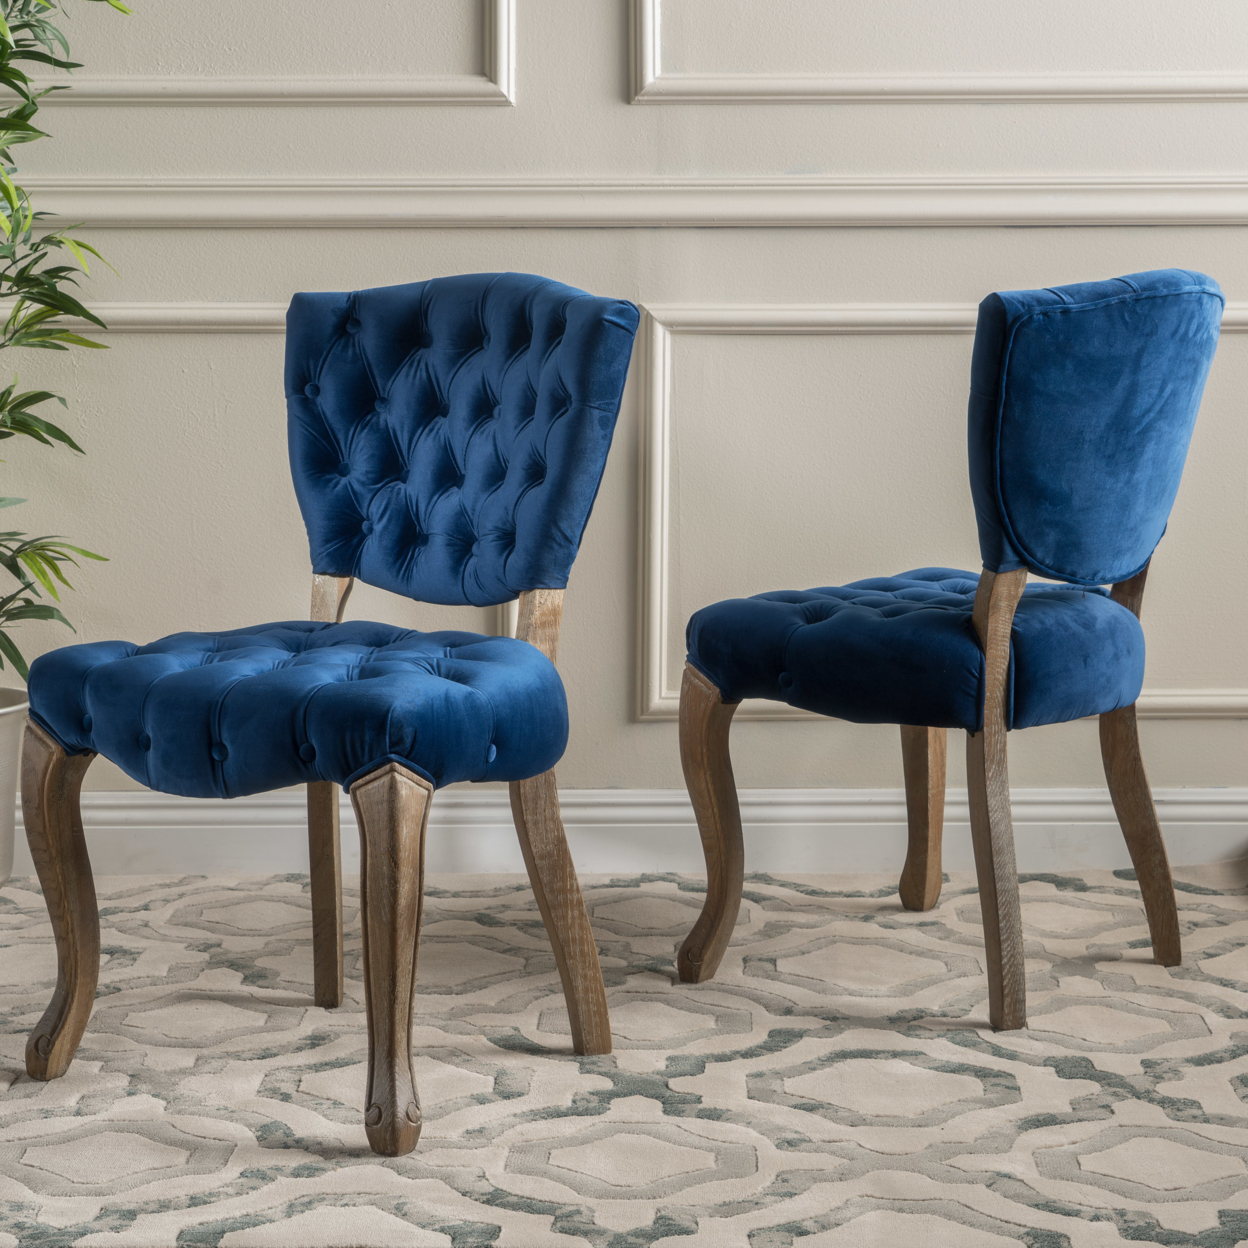 Bates Tufted Velvet Dining Chair With Cabriole Legs (Set Of 2) - Dark Green Fabric